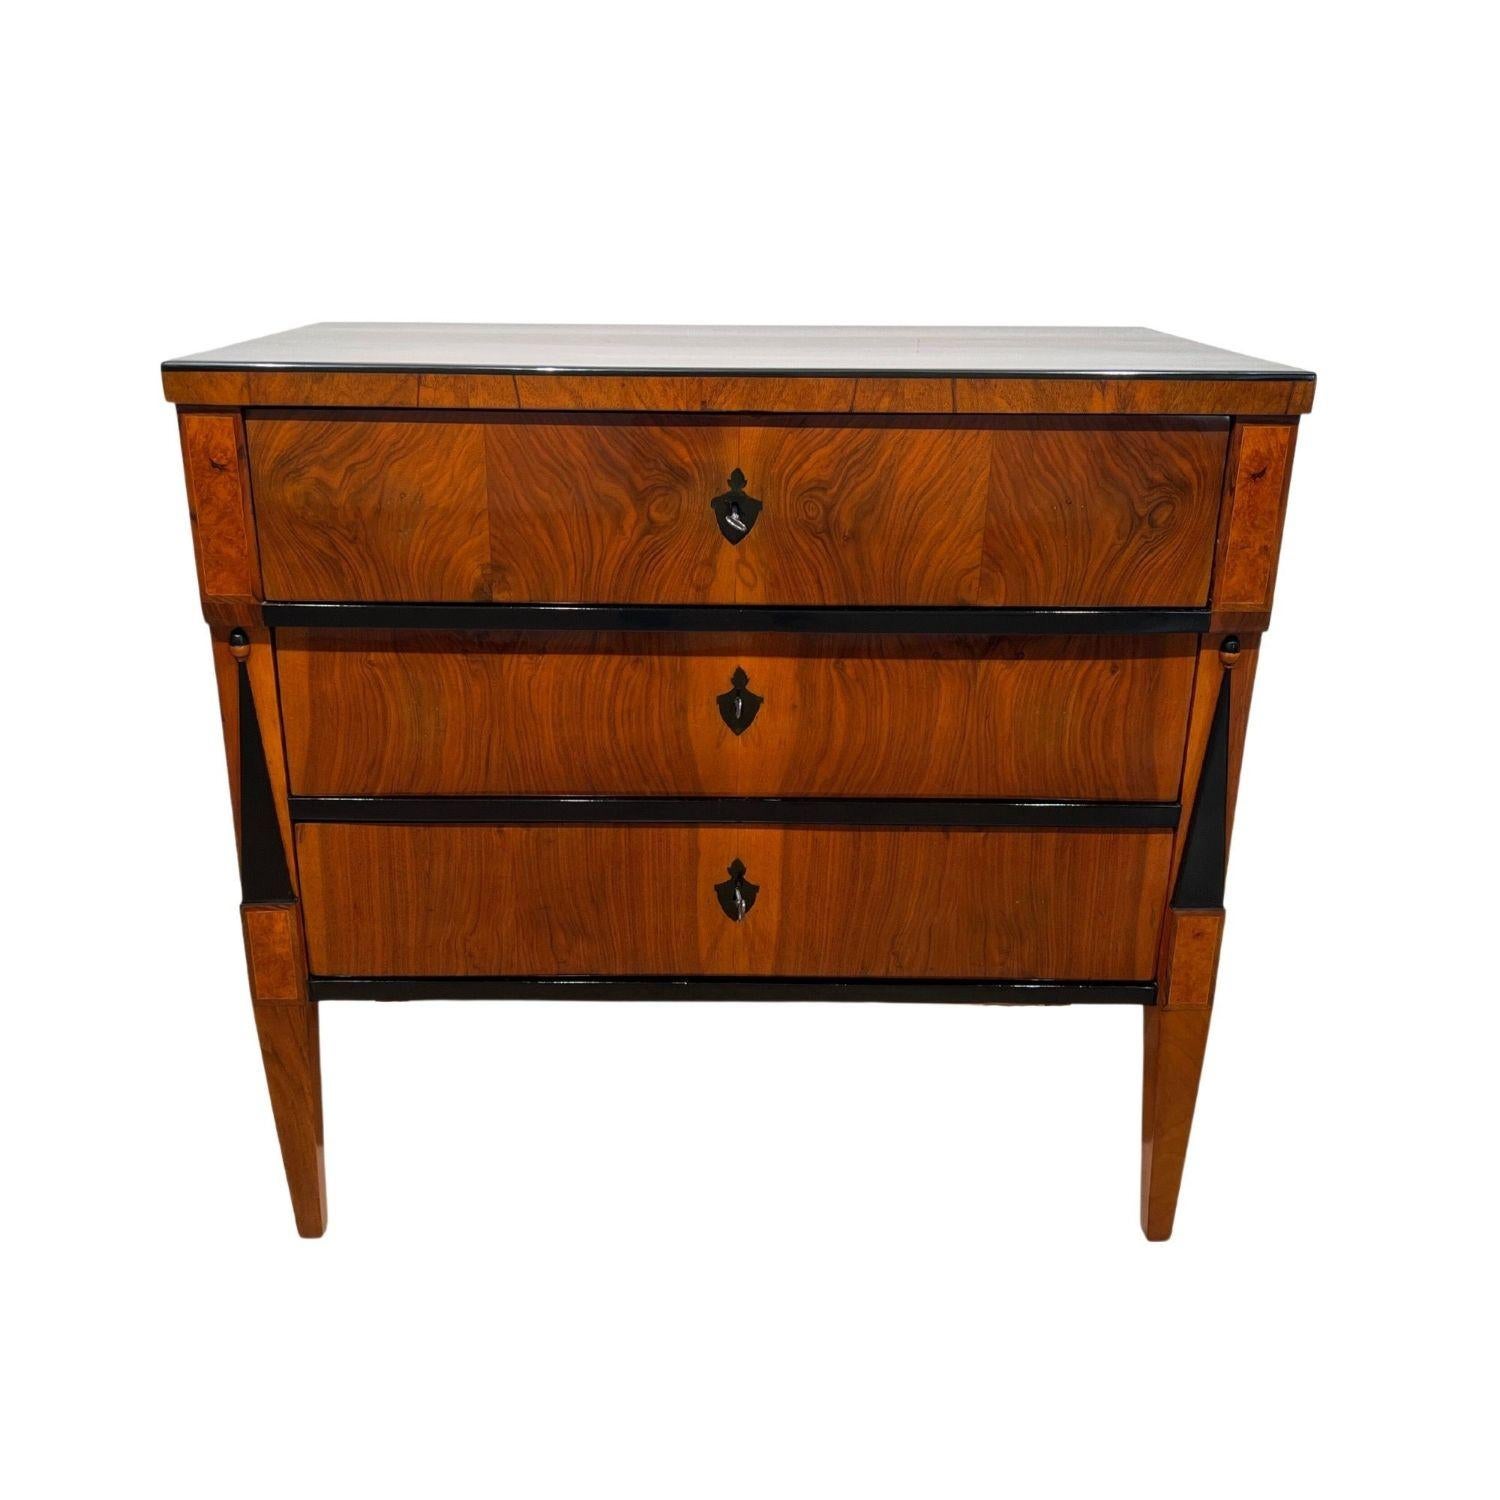 Extraordinary, greatly restored neoclassical Biedermeier writing chest or Commode in walnut from southern Germany around 1825.
* Walnut veneer on softwood body.
* Triangar lisettes with half-blackened acorn decoration at the top and birch root